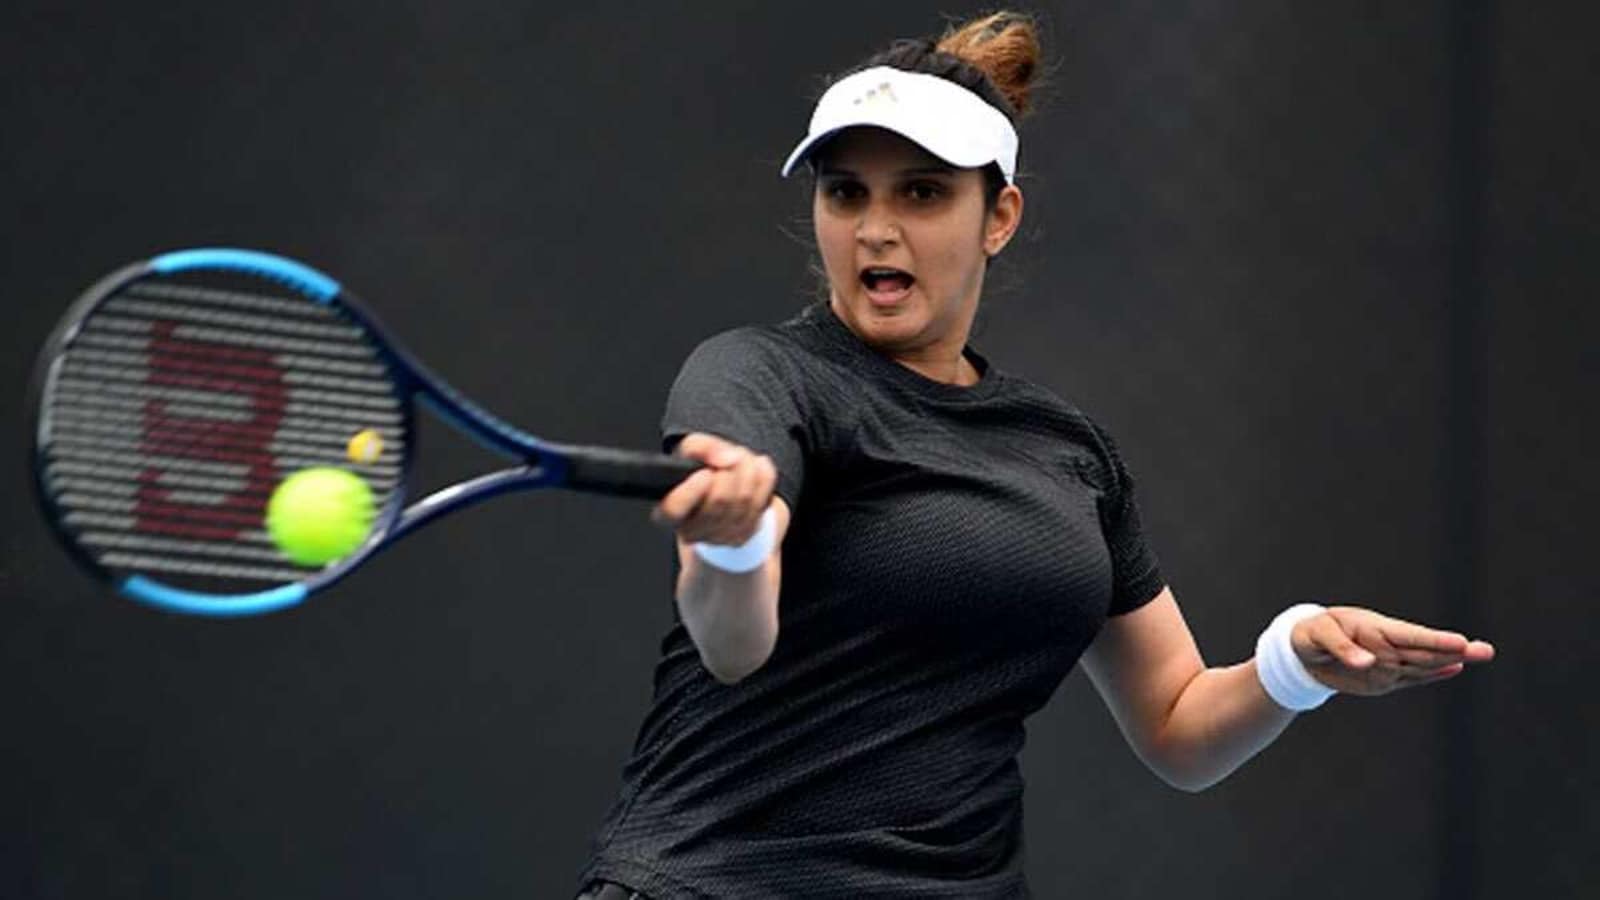 Billie Jean King Cup 2022 | Sania Mirza and Ankita Raina included in team